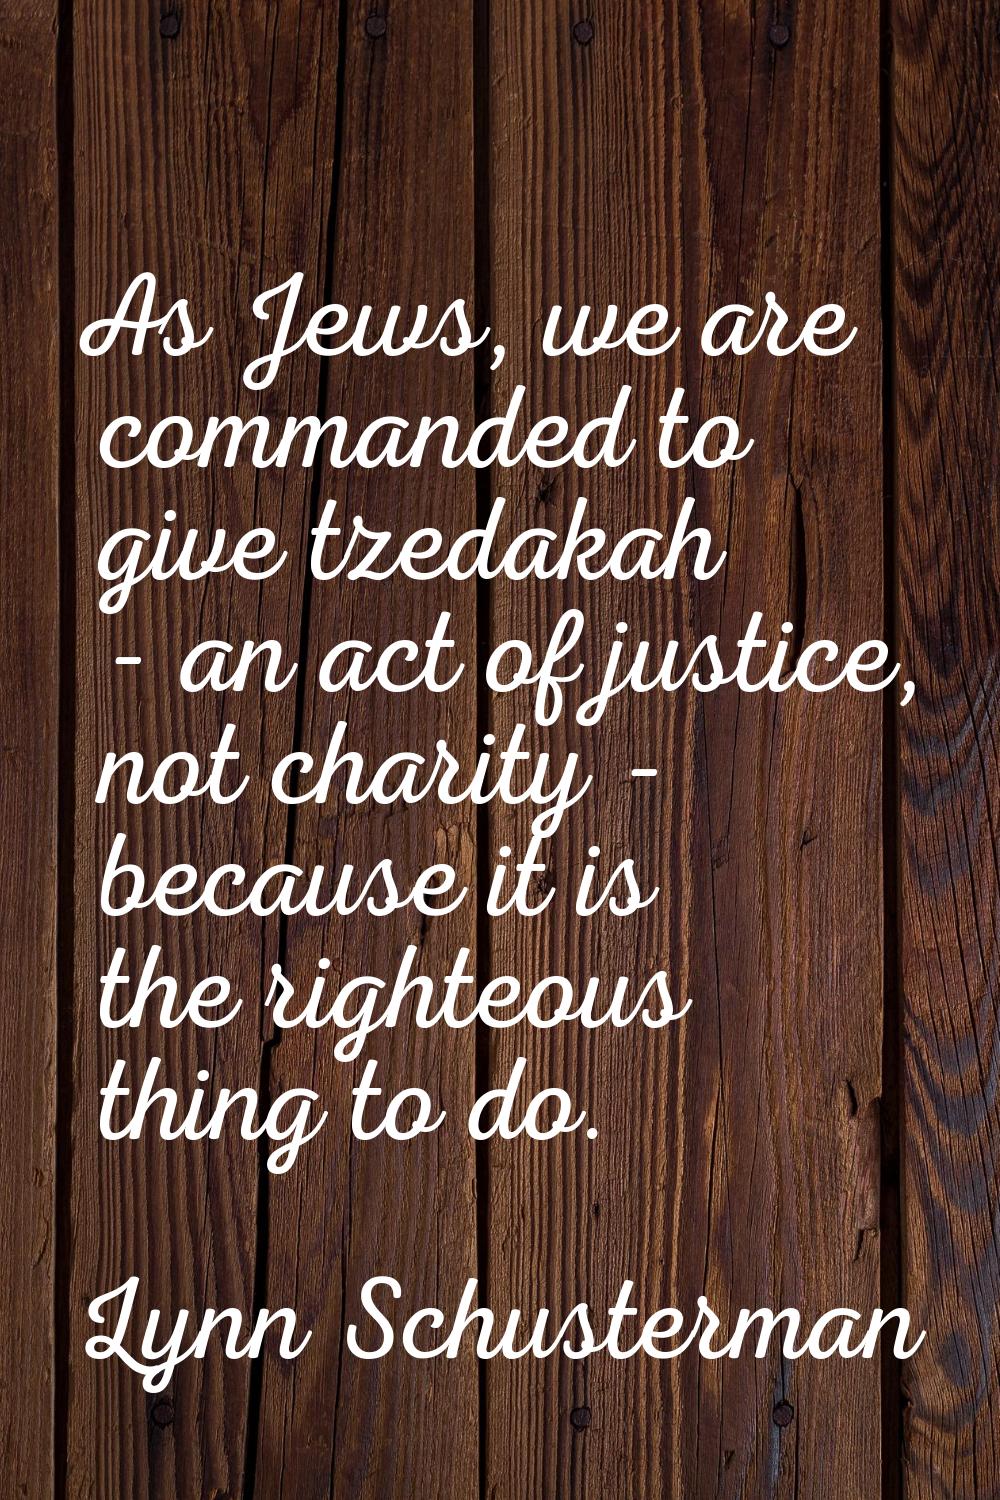 As Jews, we are commanded to give tzedakah - an act of justice, not charity - because it is the rig